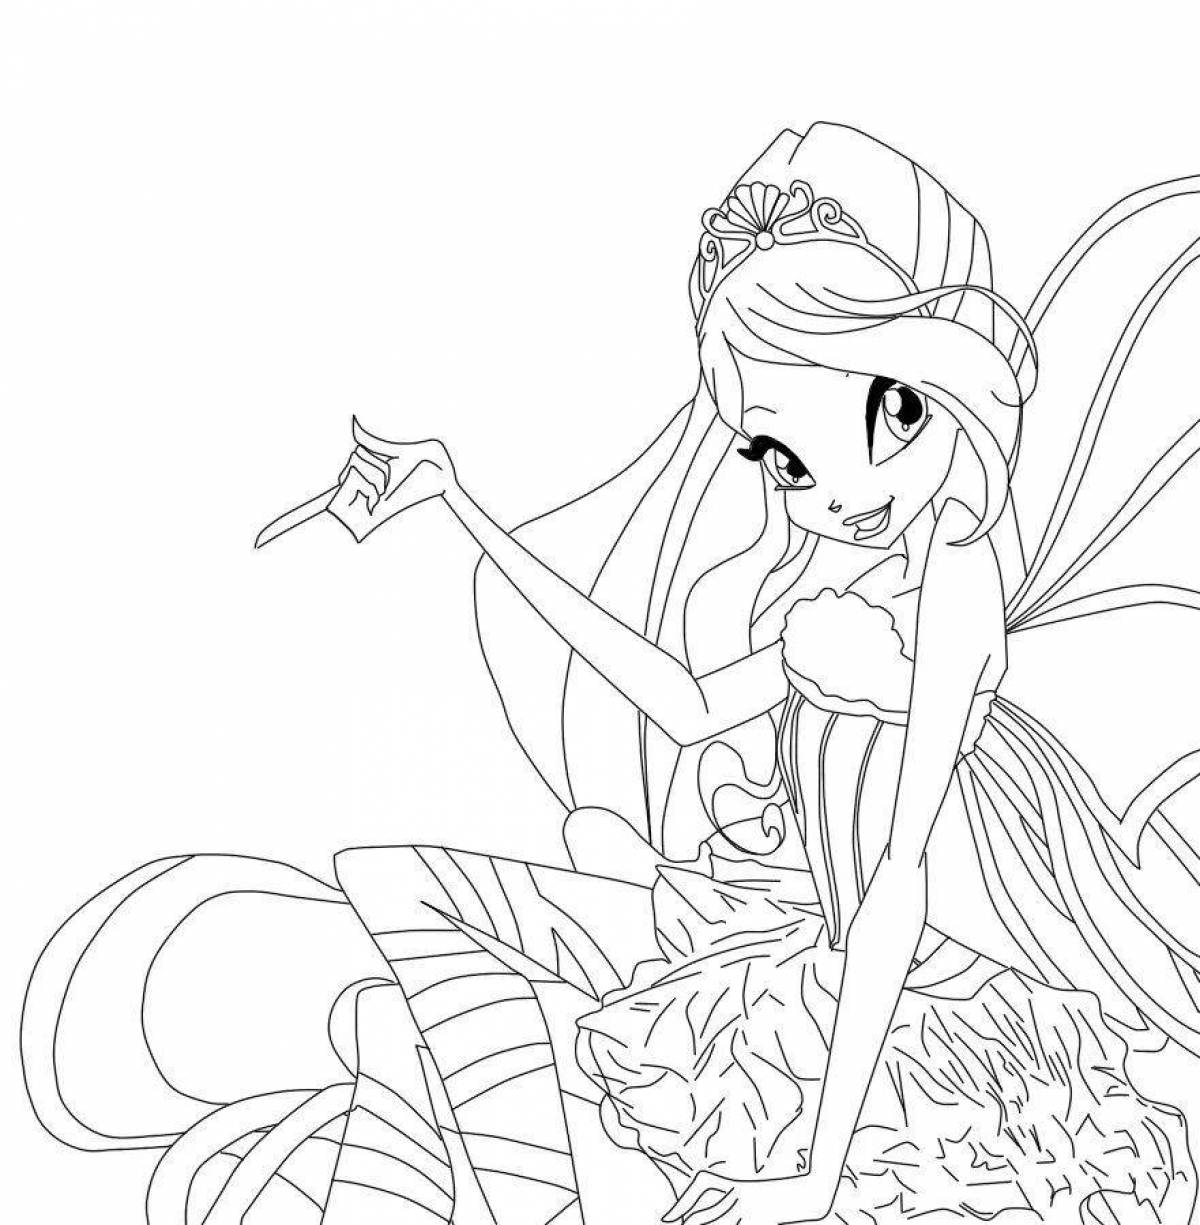 Gorgeous winx coloring for girls fairies